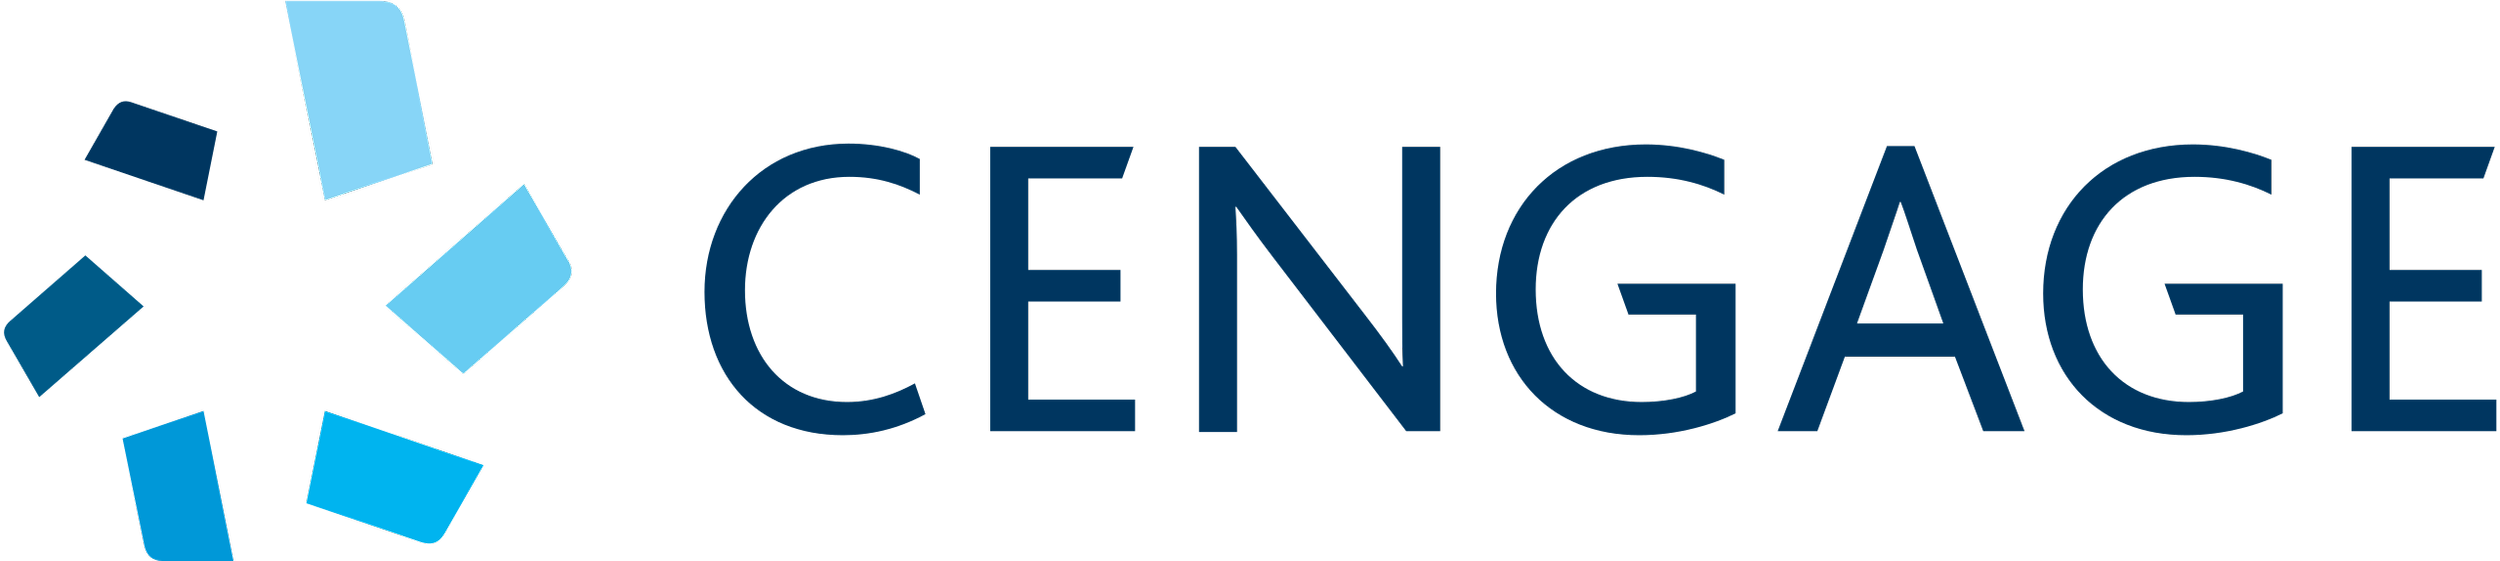 2560px-Cengage-logo.svg.png